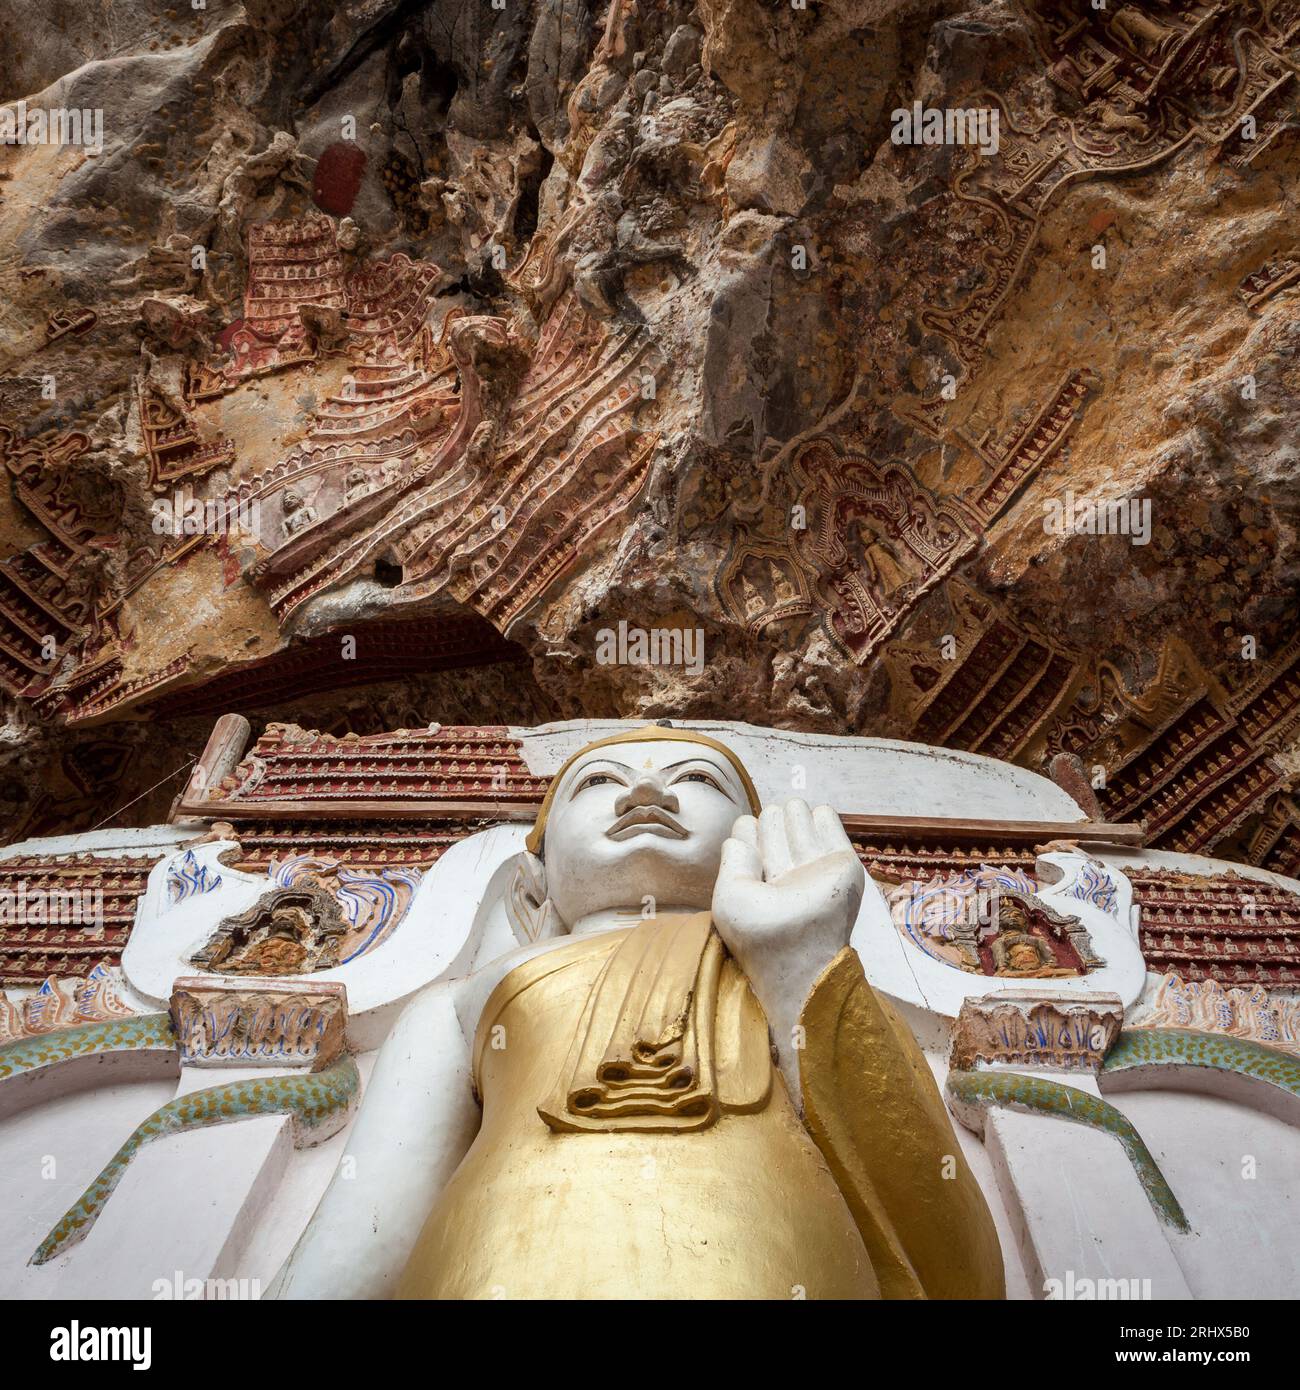 Buddha statue with carvings in Kaw Goon cave in Myanmar. Stock Photo